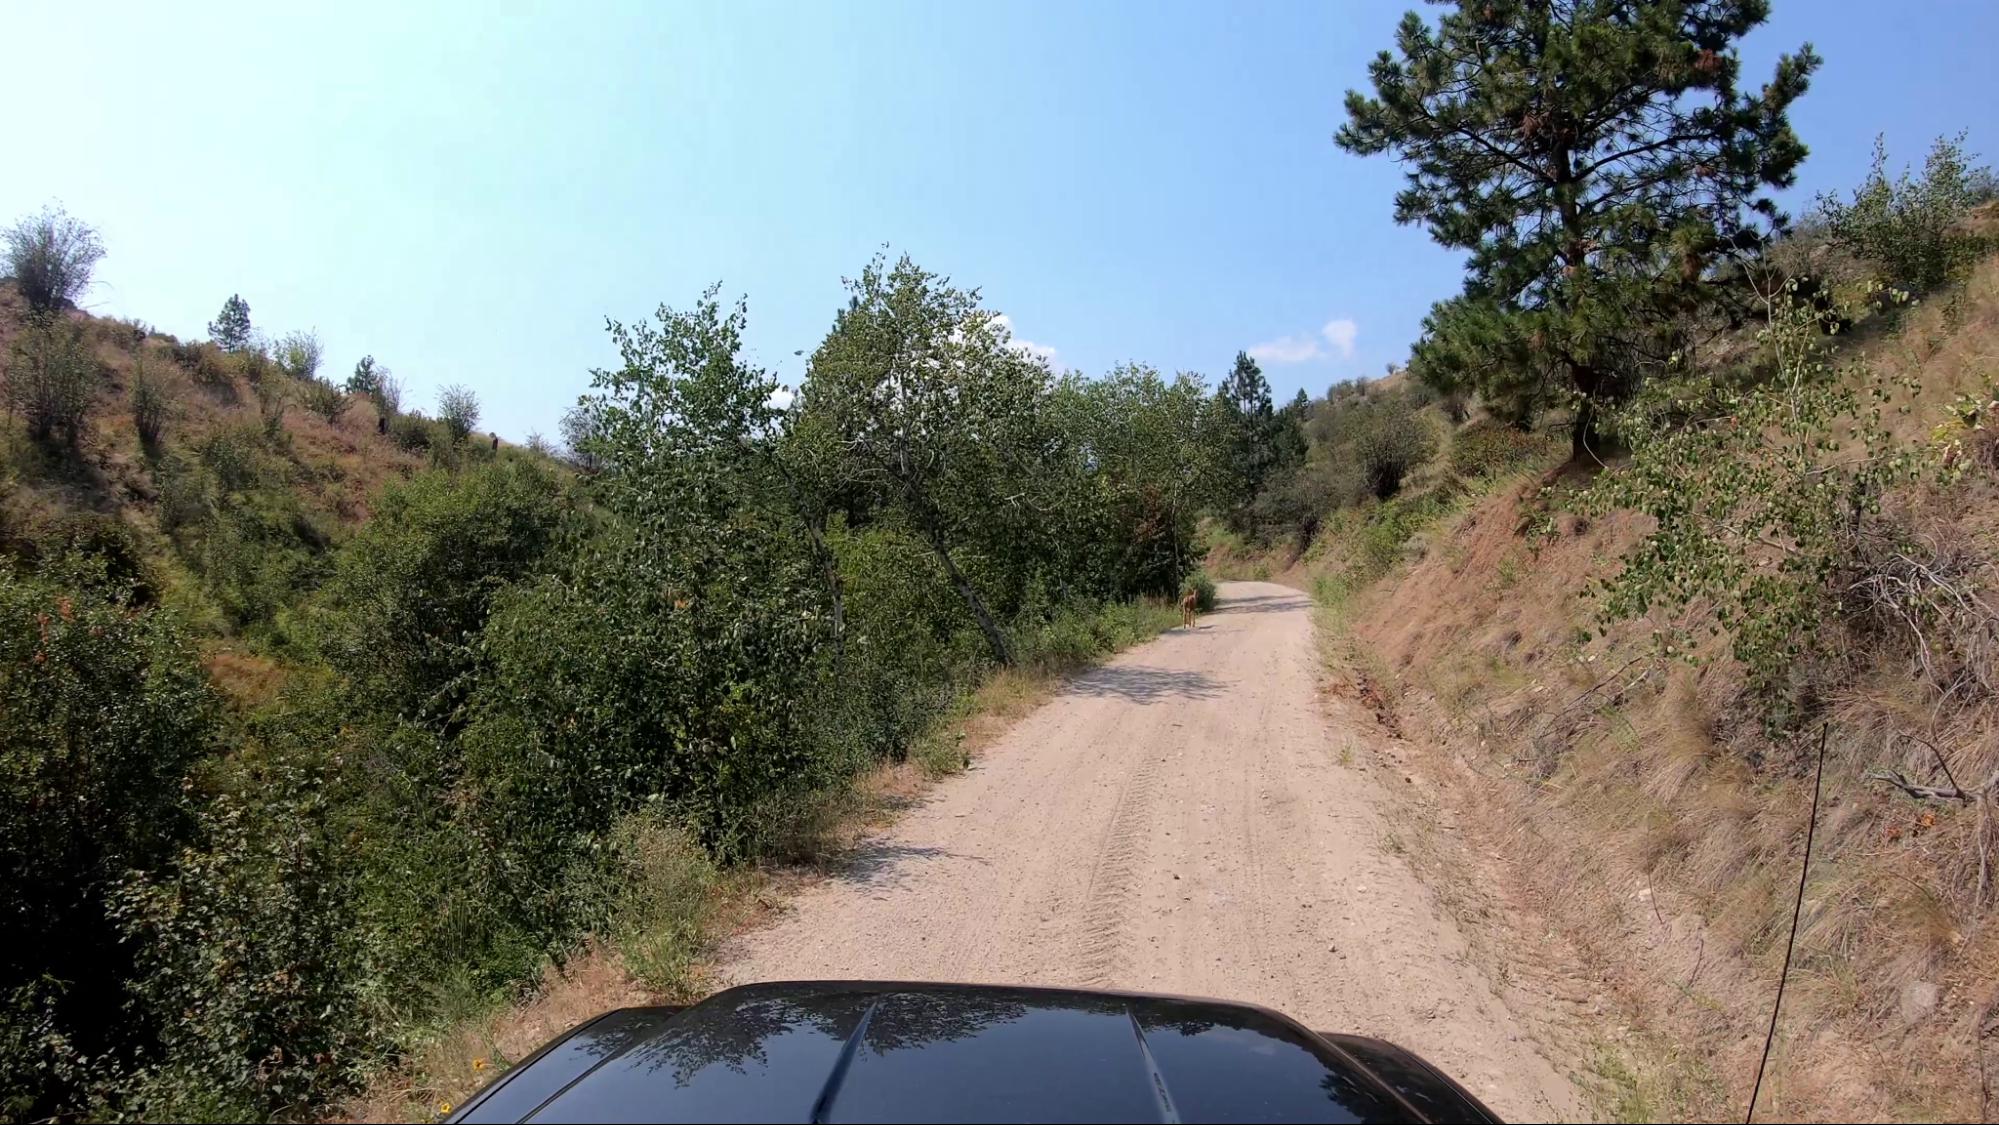 The road to the Burnell rec site is narrow, bumpy and one vehicle wide. There is also the potential for low hanging tree branches. 